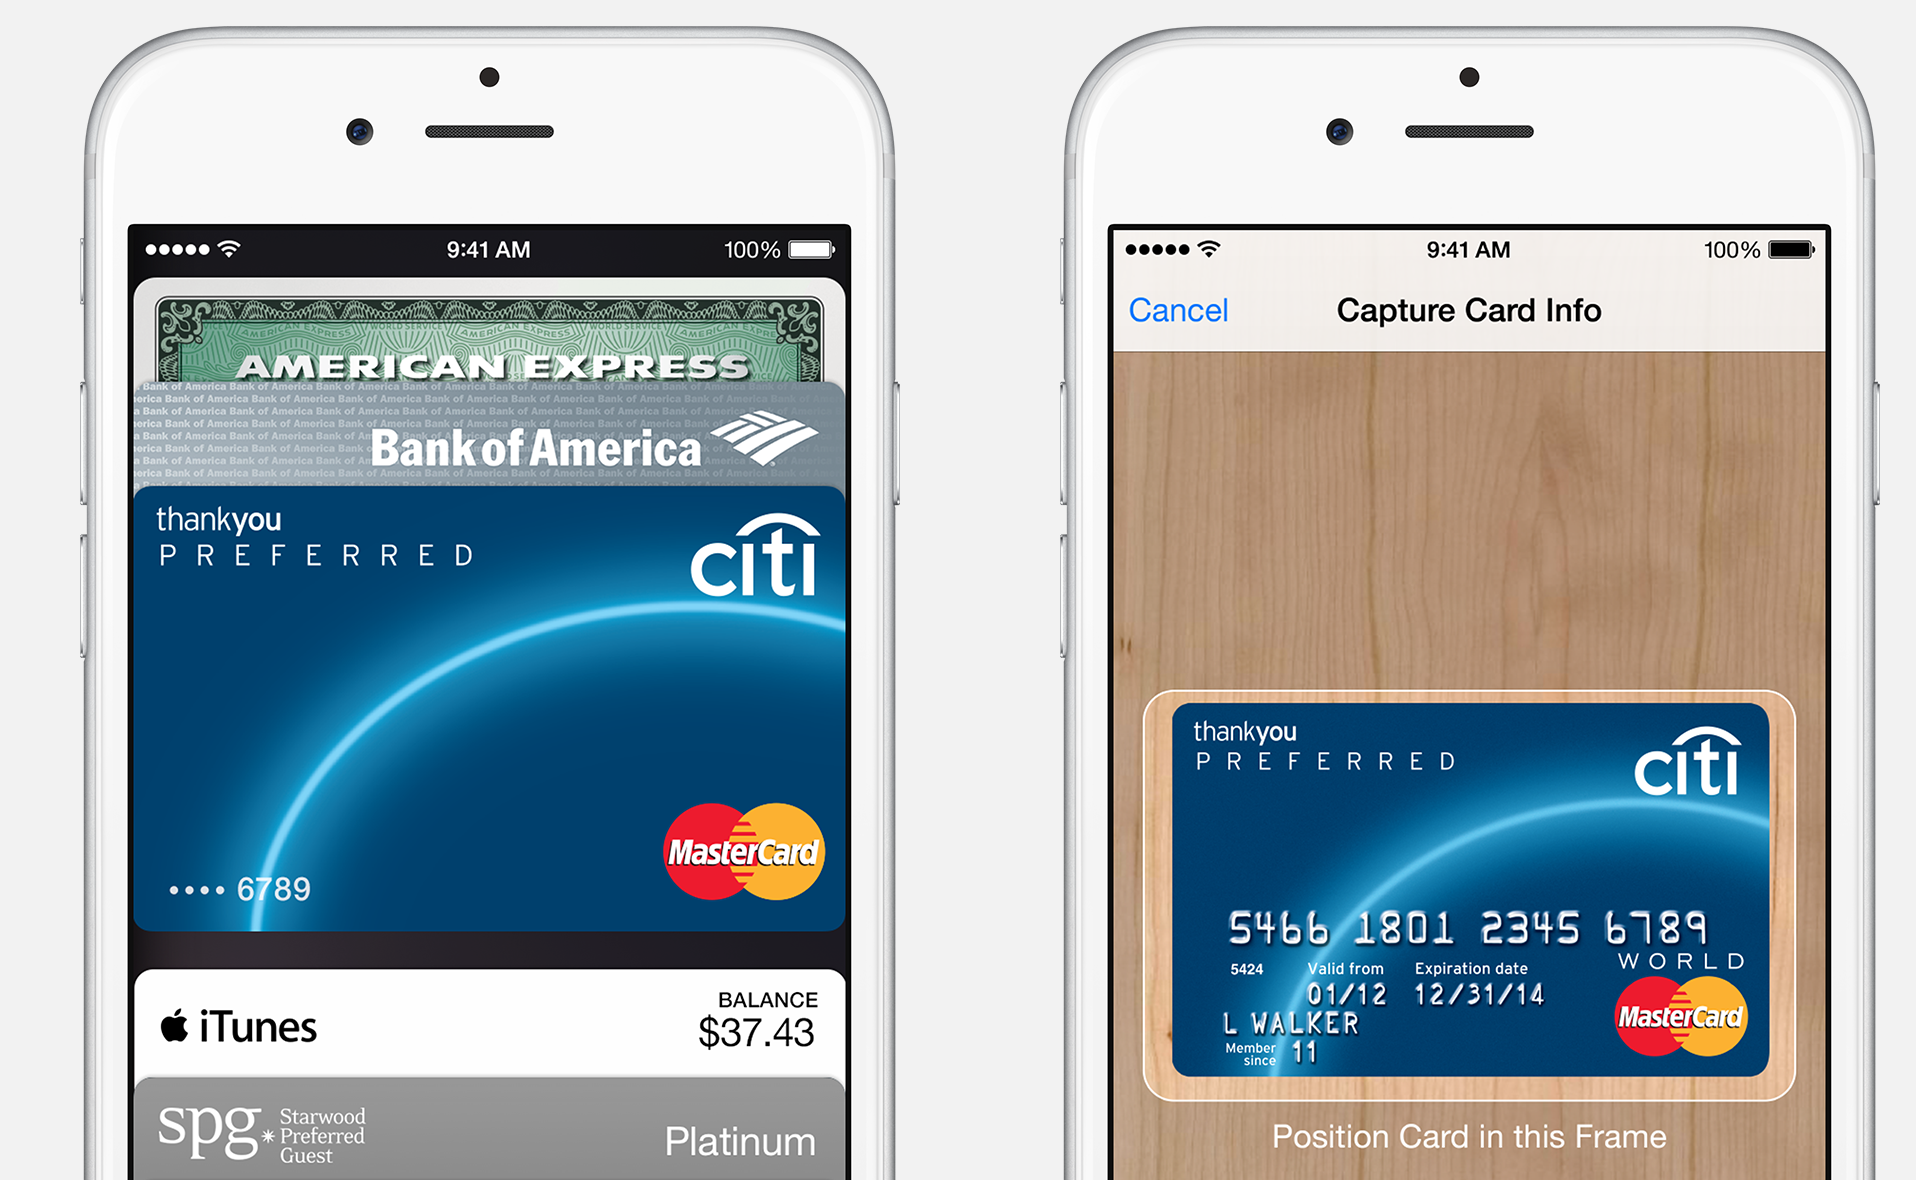 Apple Pay Lets Man Scan, Use Wife's Citi Credit Card Without Additional Verification - Consumerist